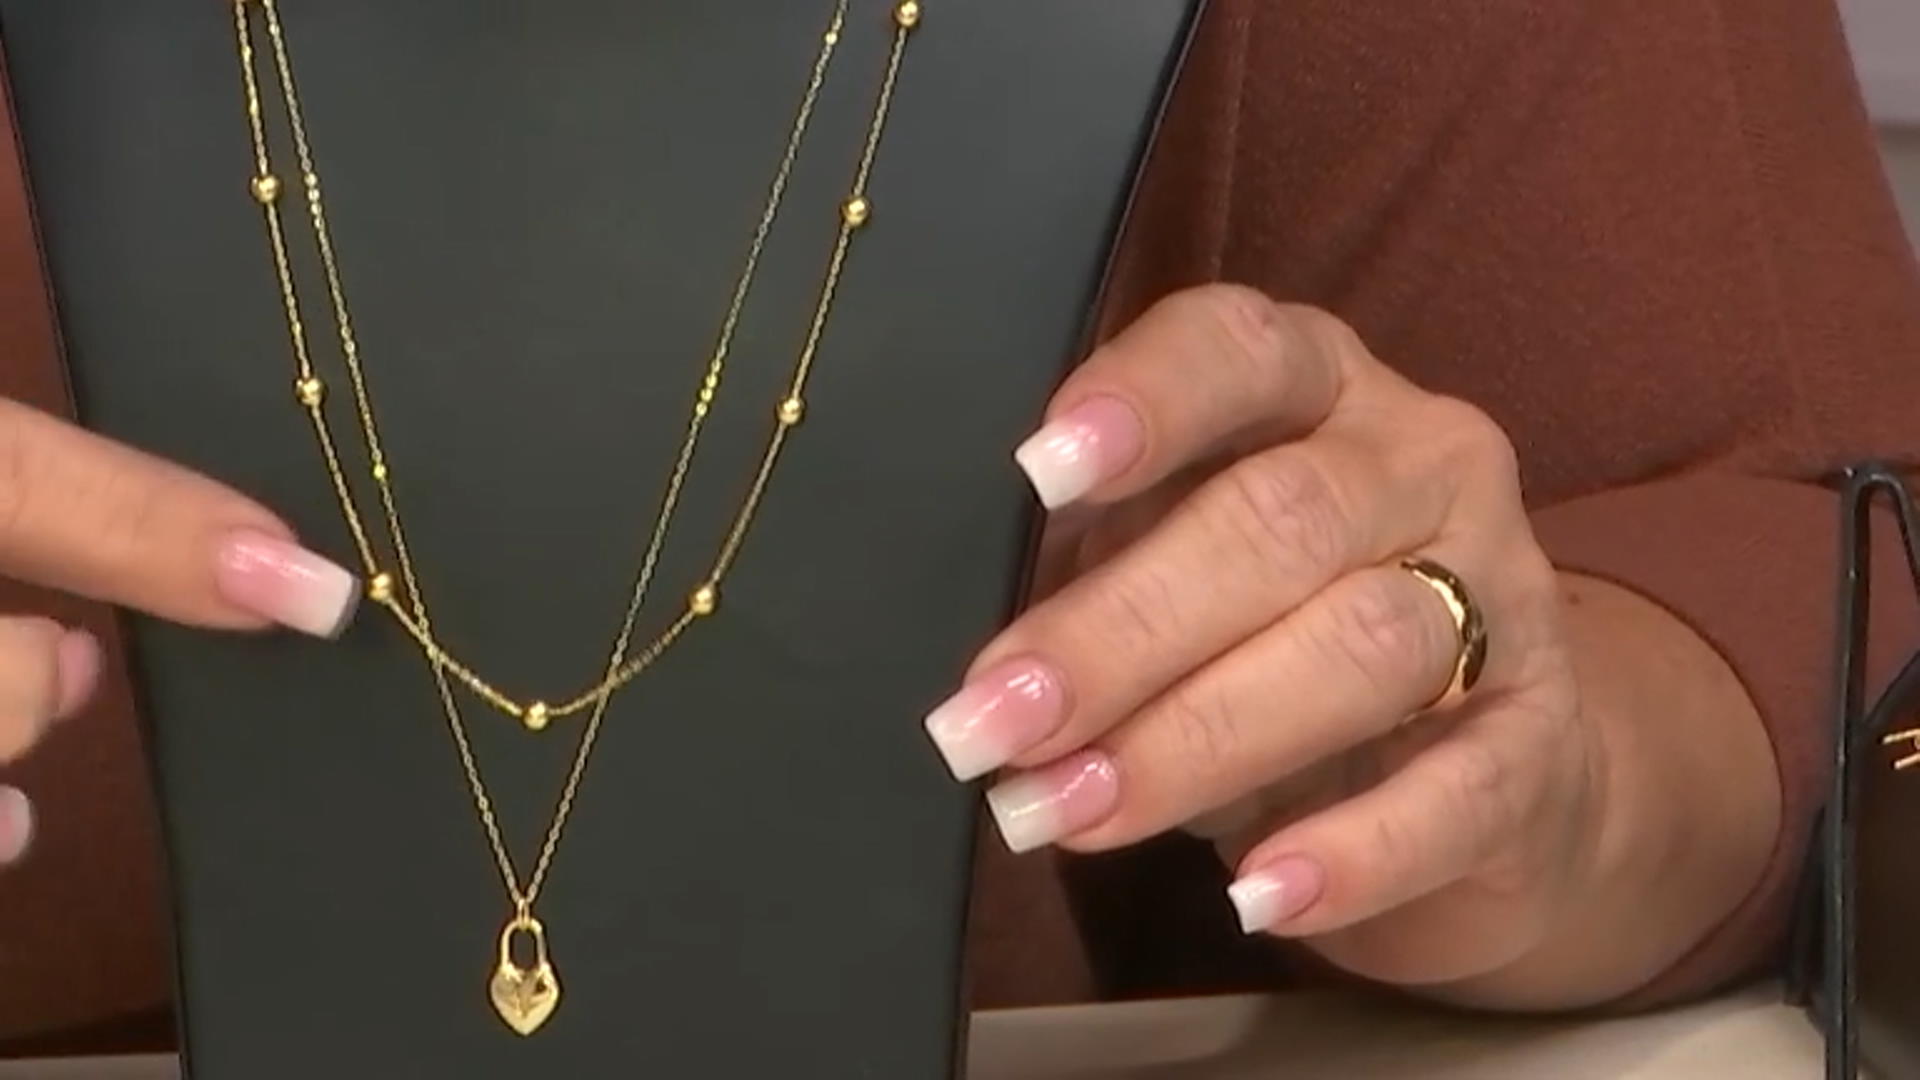 14K Yellow Gold Bead Station Necklace Video Thumbnail